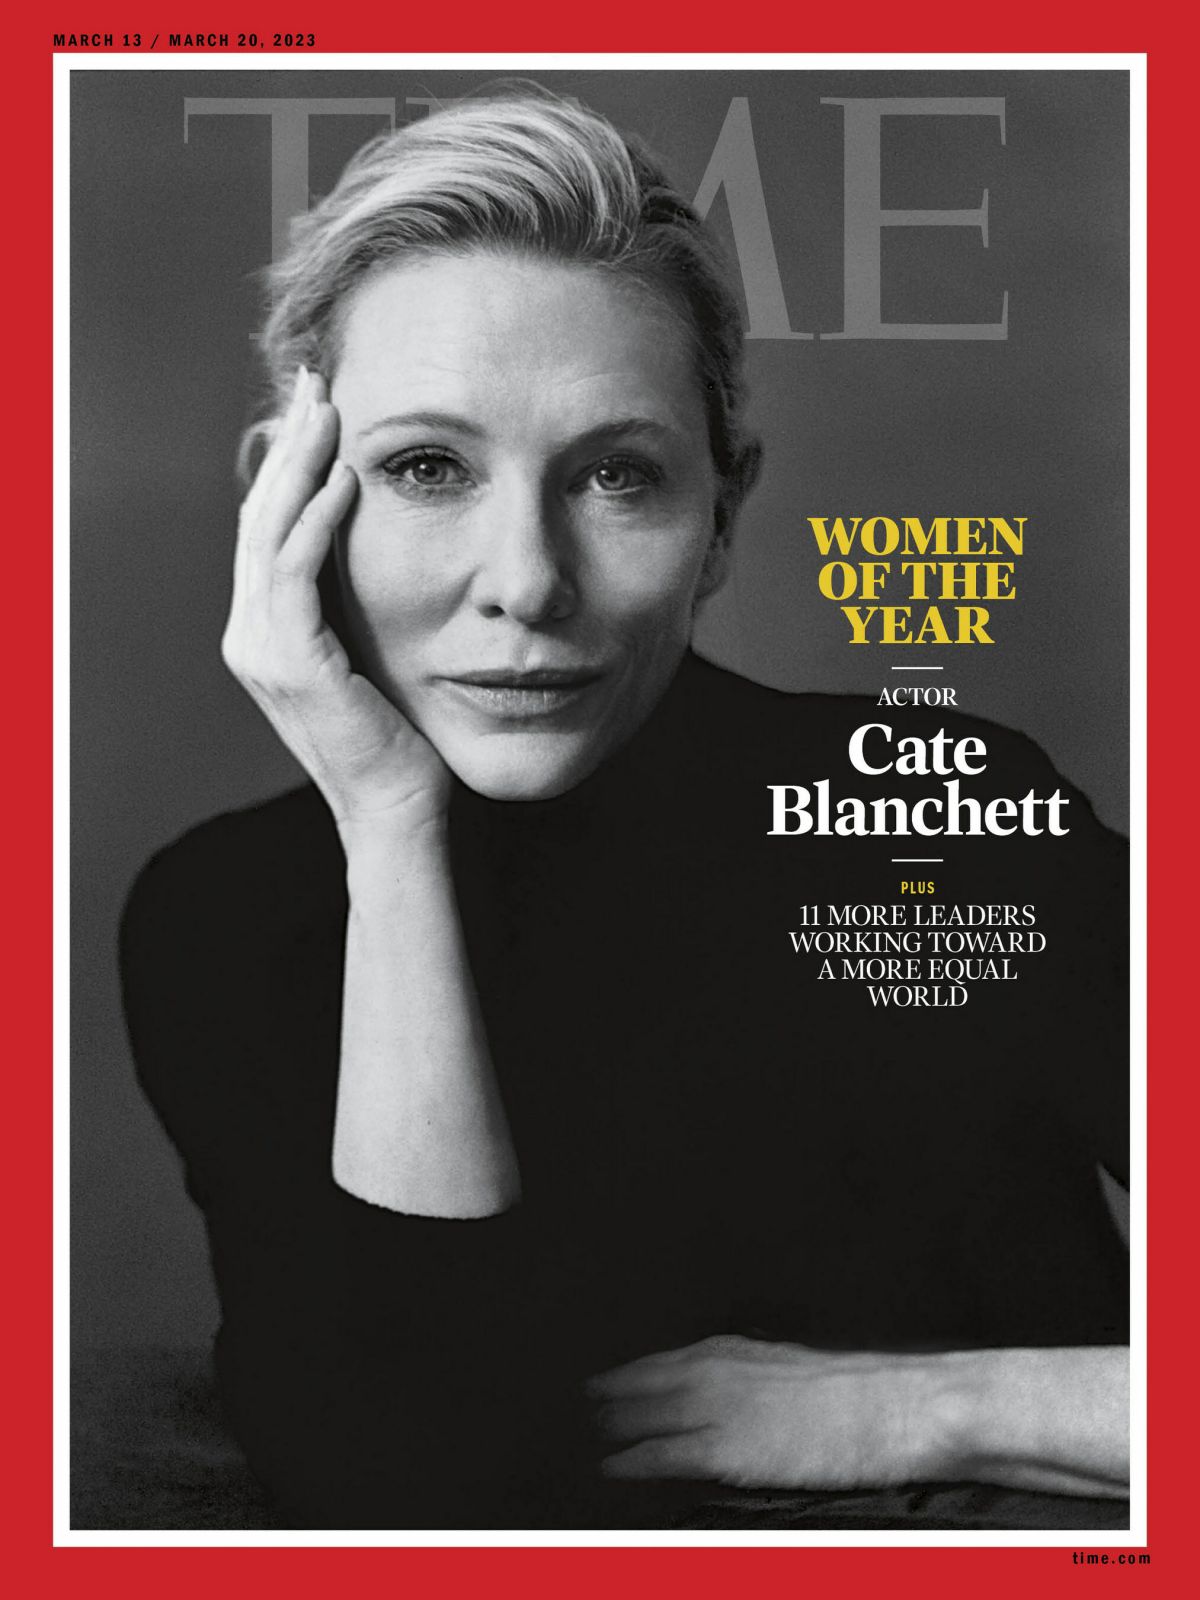 CATE BLANCHETT for Time Magazine Woman of the Year, March 2023